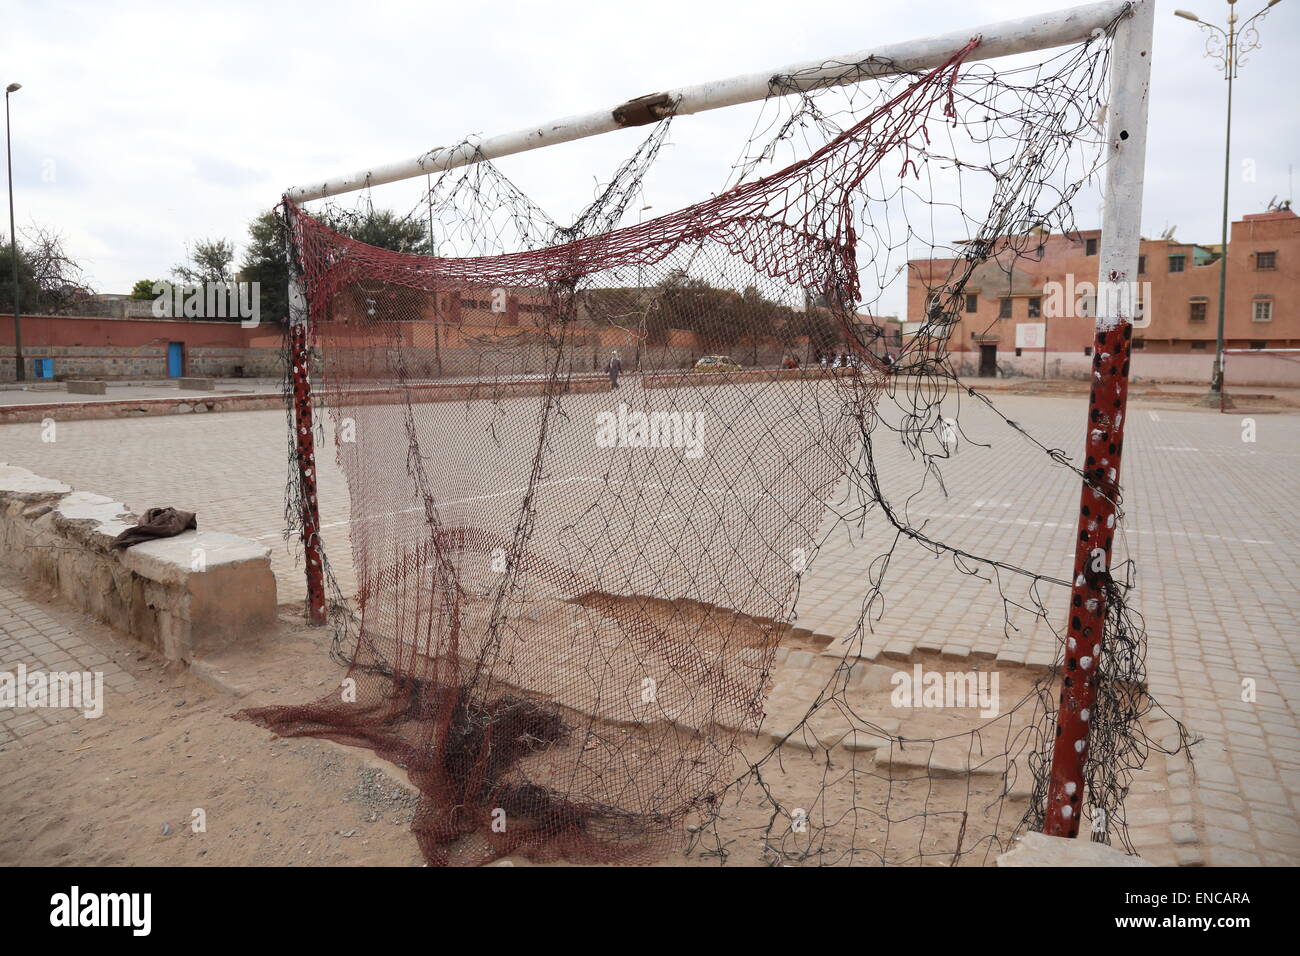 Football goalposts with a very worn net alongside a concrete pitch in Marrakech, Morocco Stock Photo